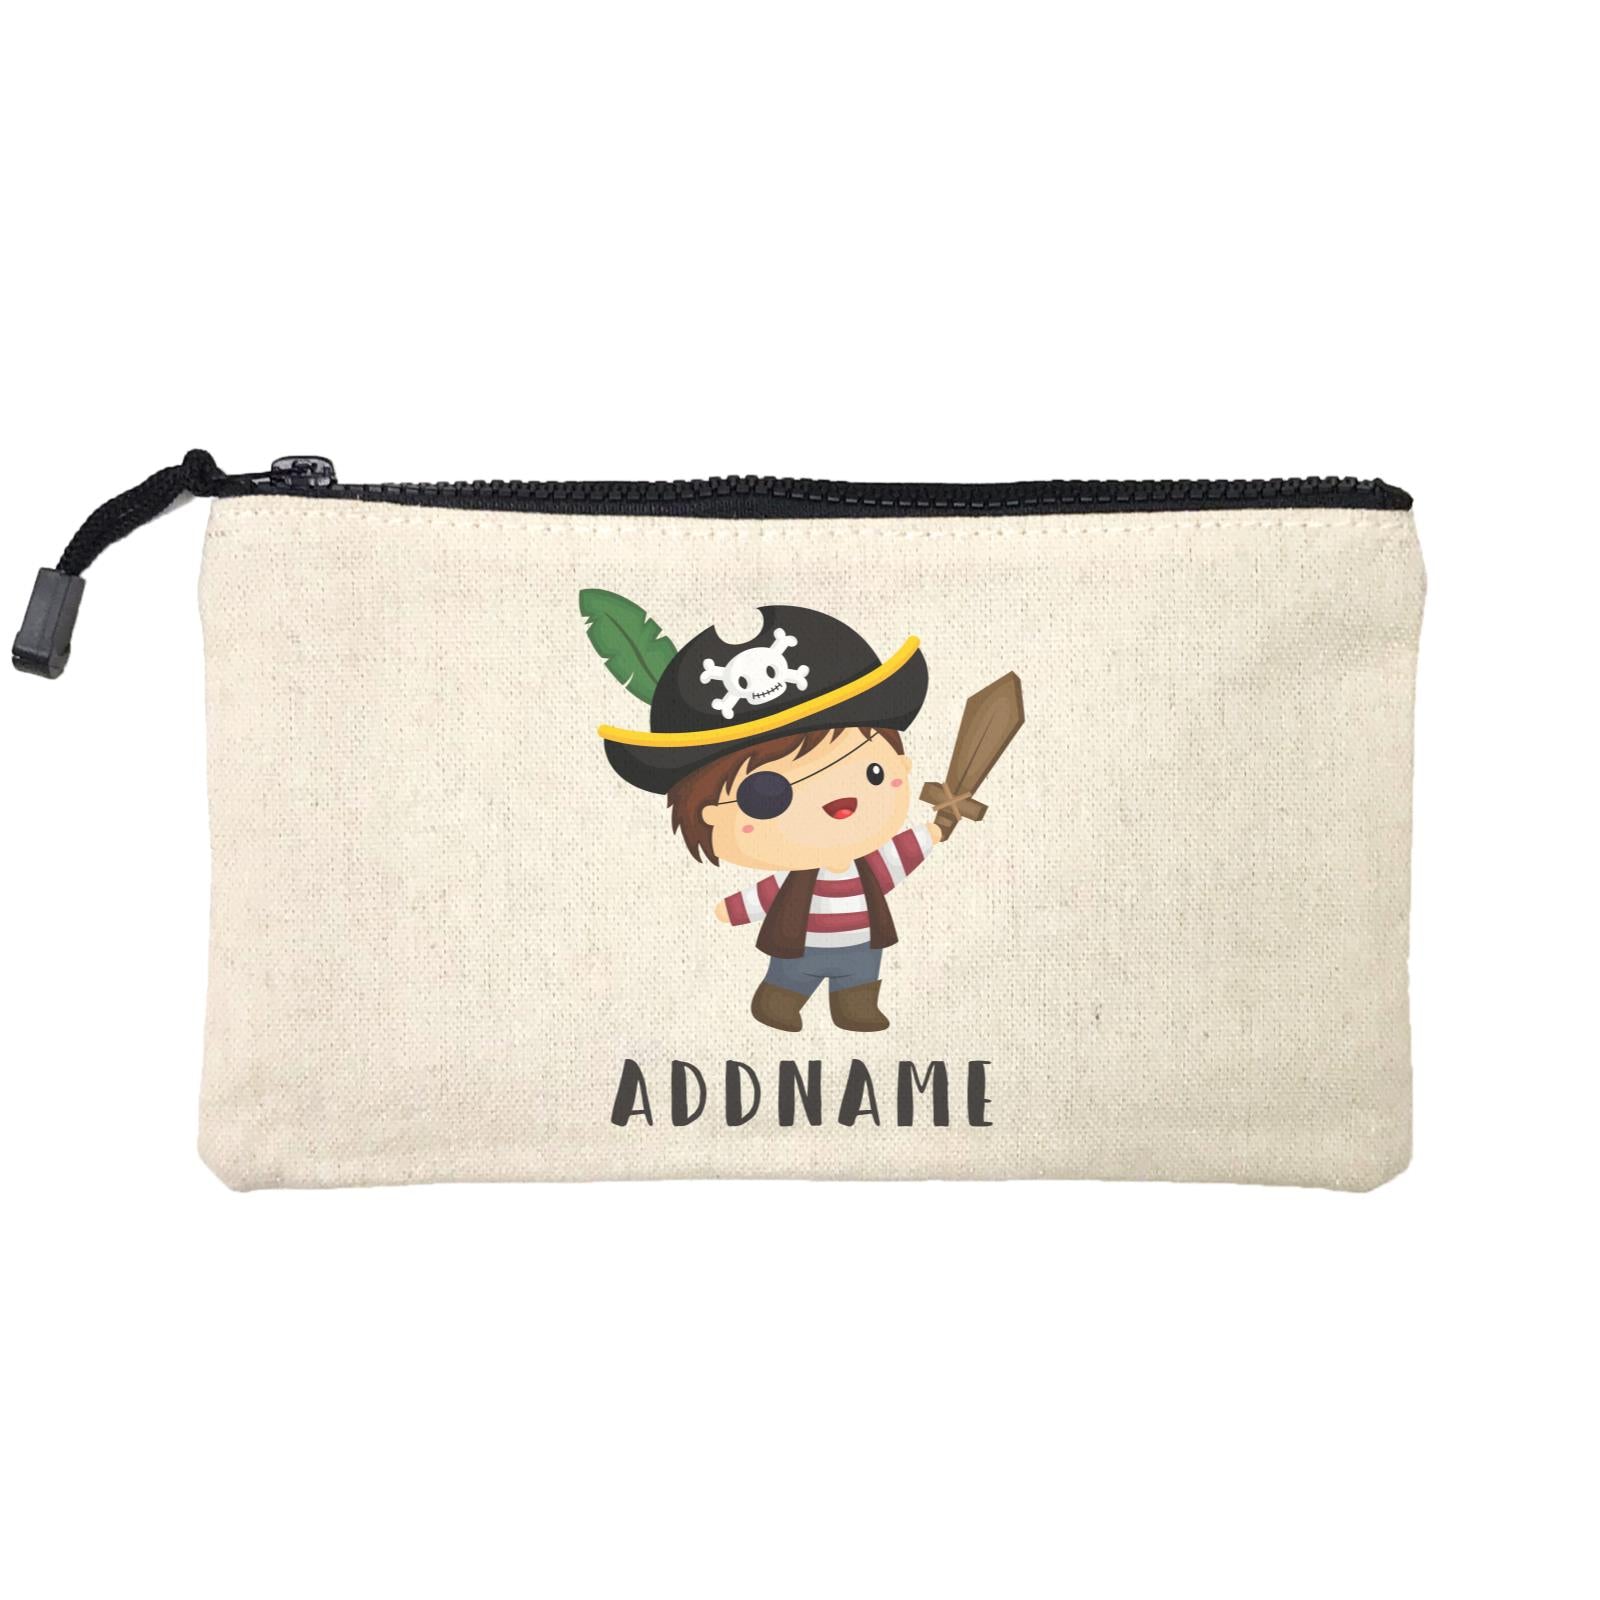 Birthday Pirate Captain Boy Playing Wodden Sword Addname Mini Accessories Stationery Pouch